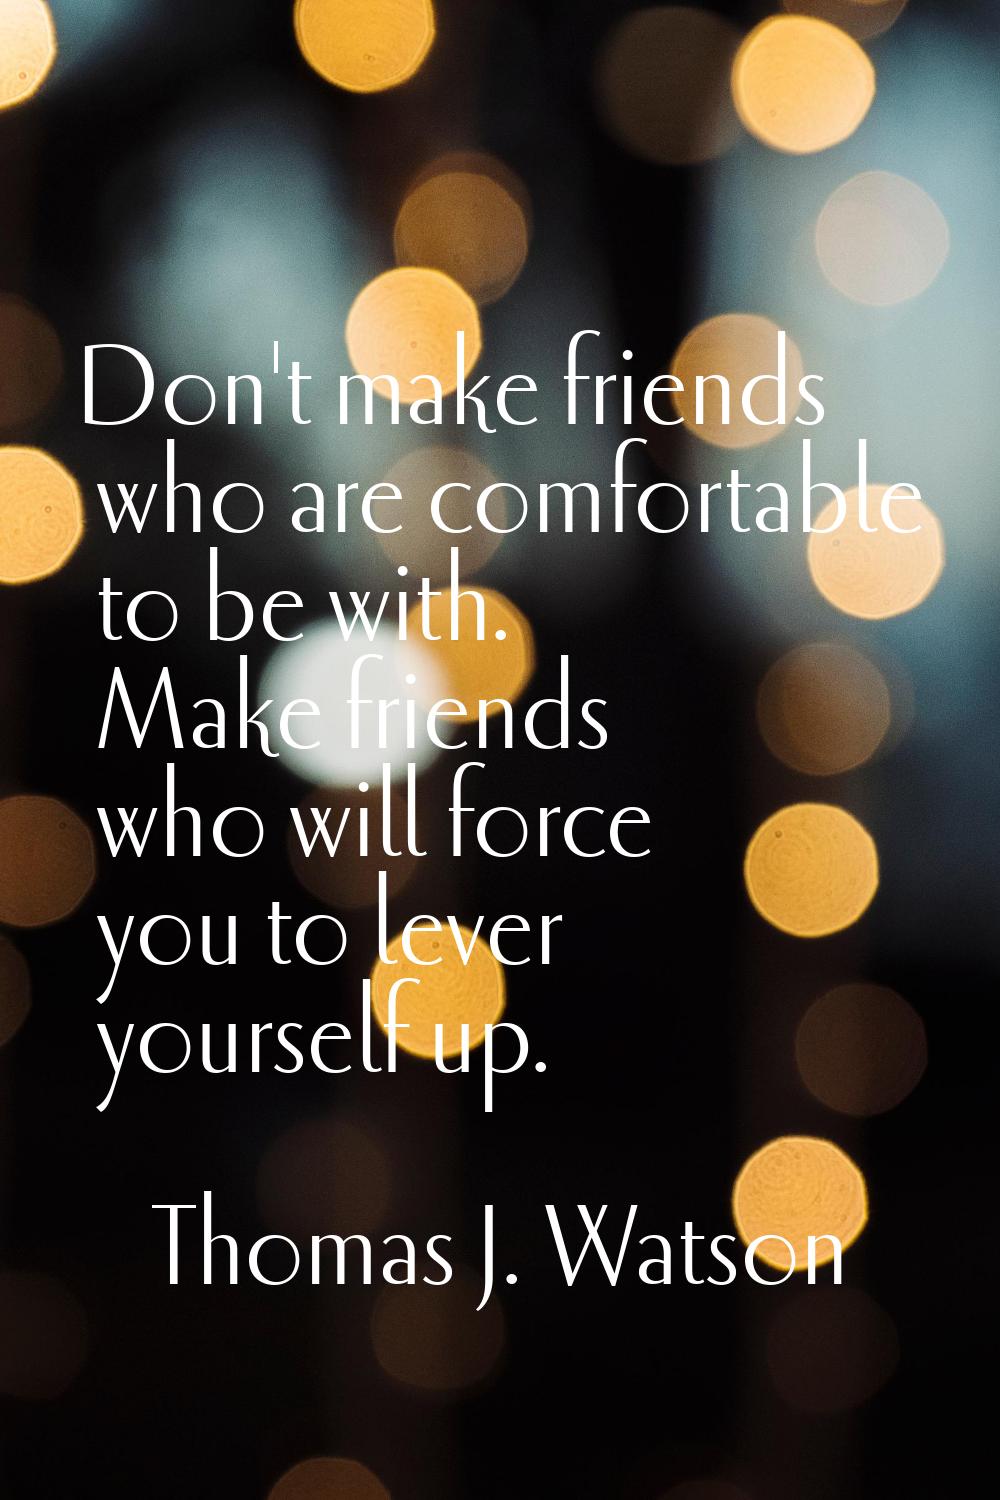 Don't make friends who are comfortable to be with. Make friends who will force you to lever yoursel